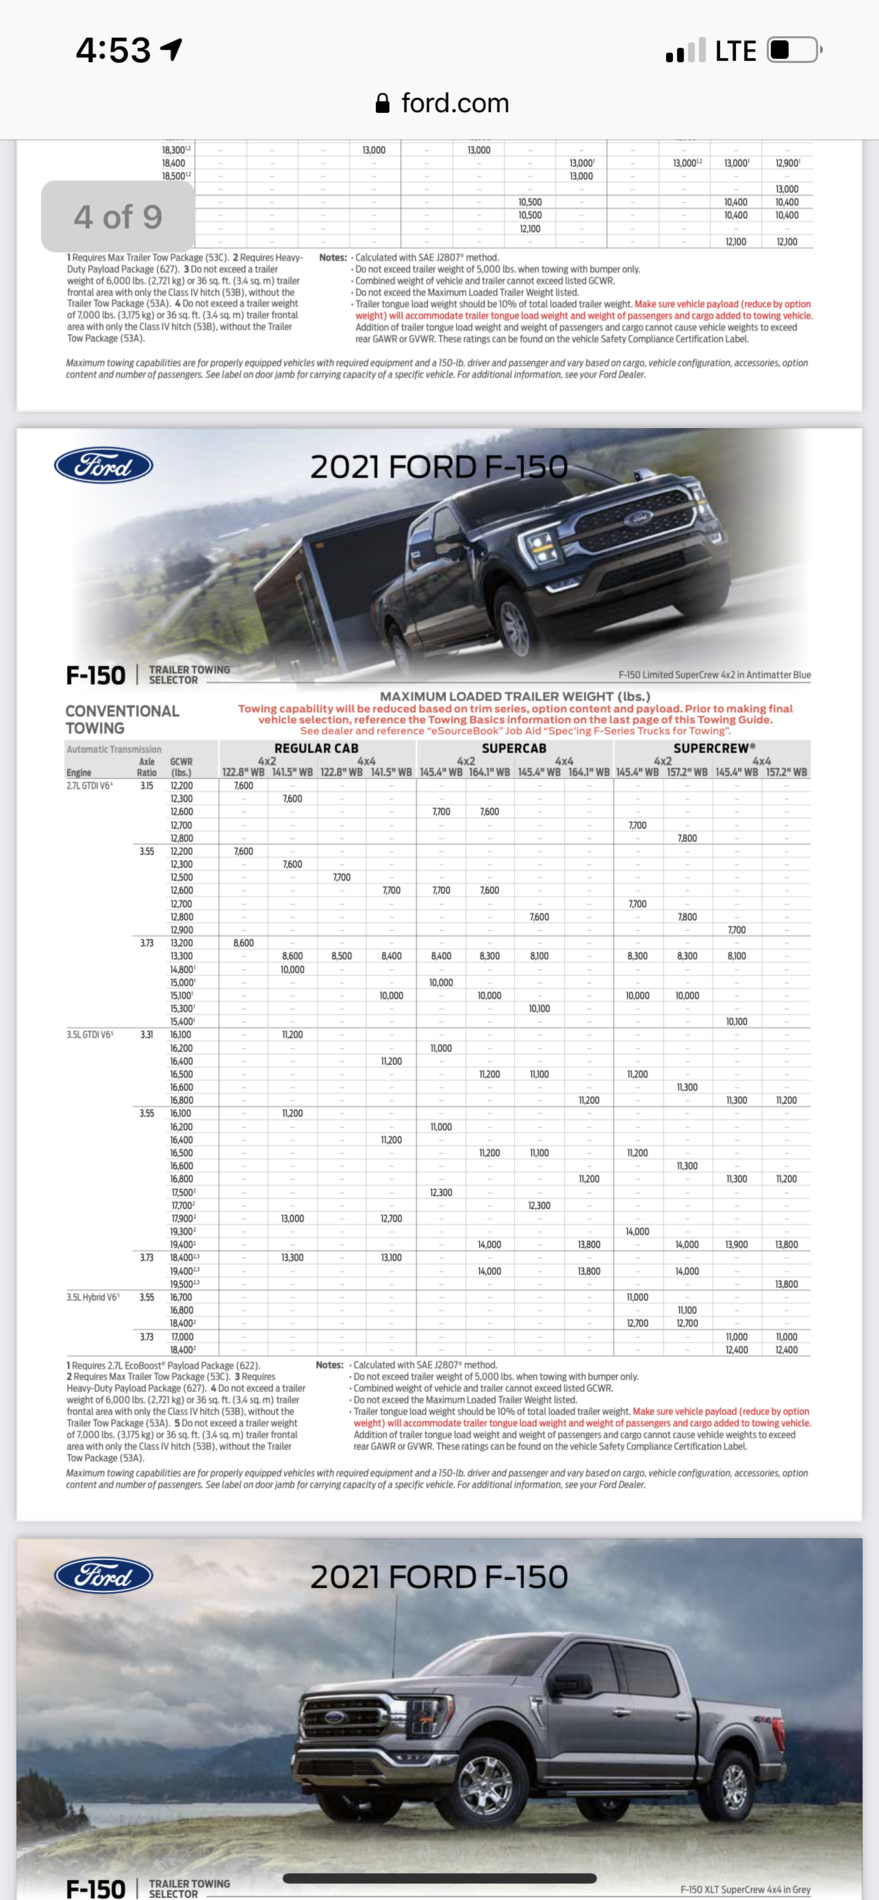 Ford F-150 Lightning Is there any reason NOT to get the Max Tow package? C168BFE9-544A-4FBC-B56B-4C4A21EEF4B7